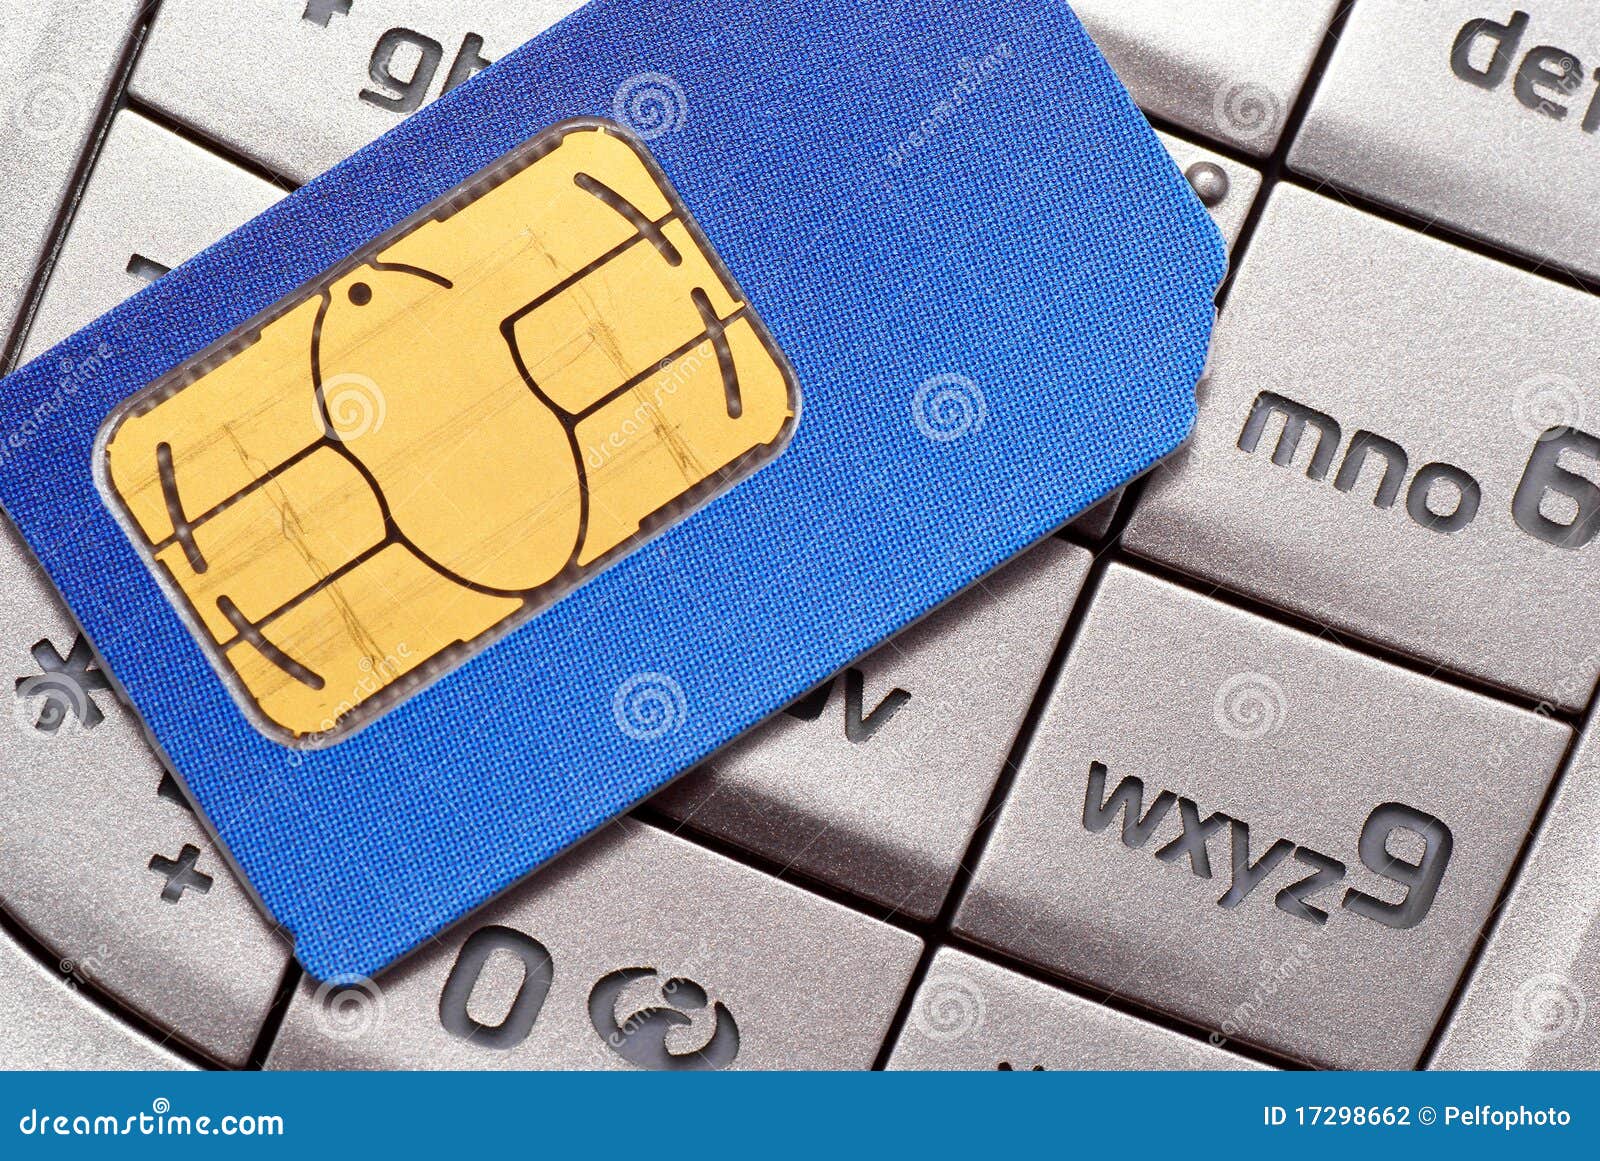 Card to mobile phone. stock photo. Image of electronic - 17298662